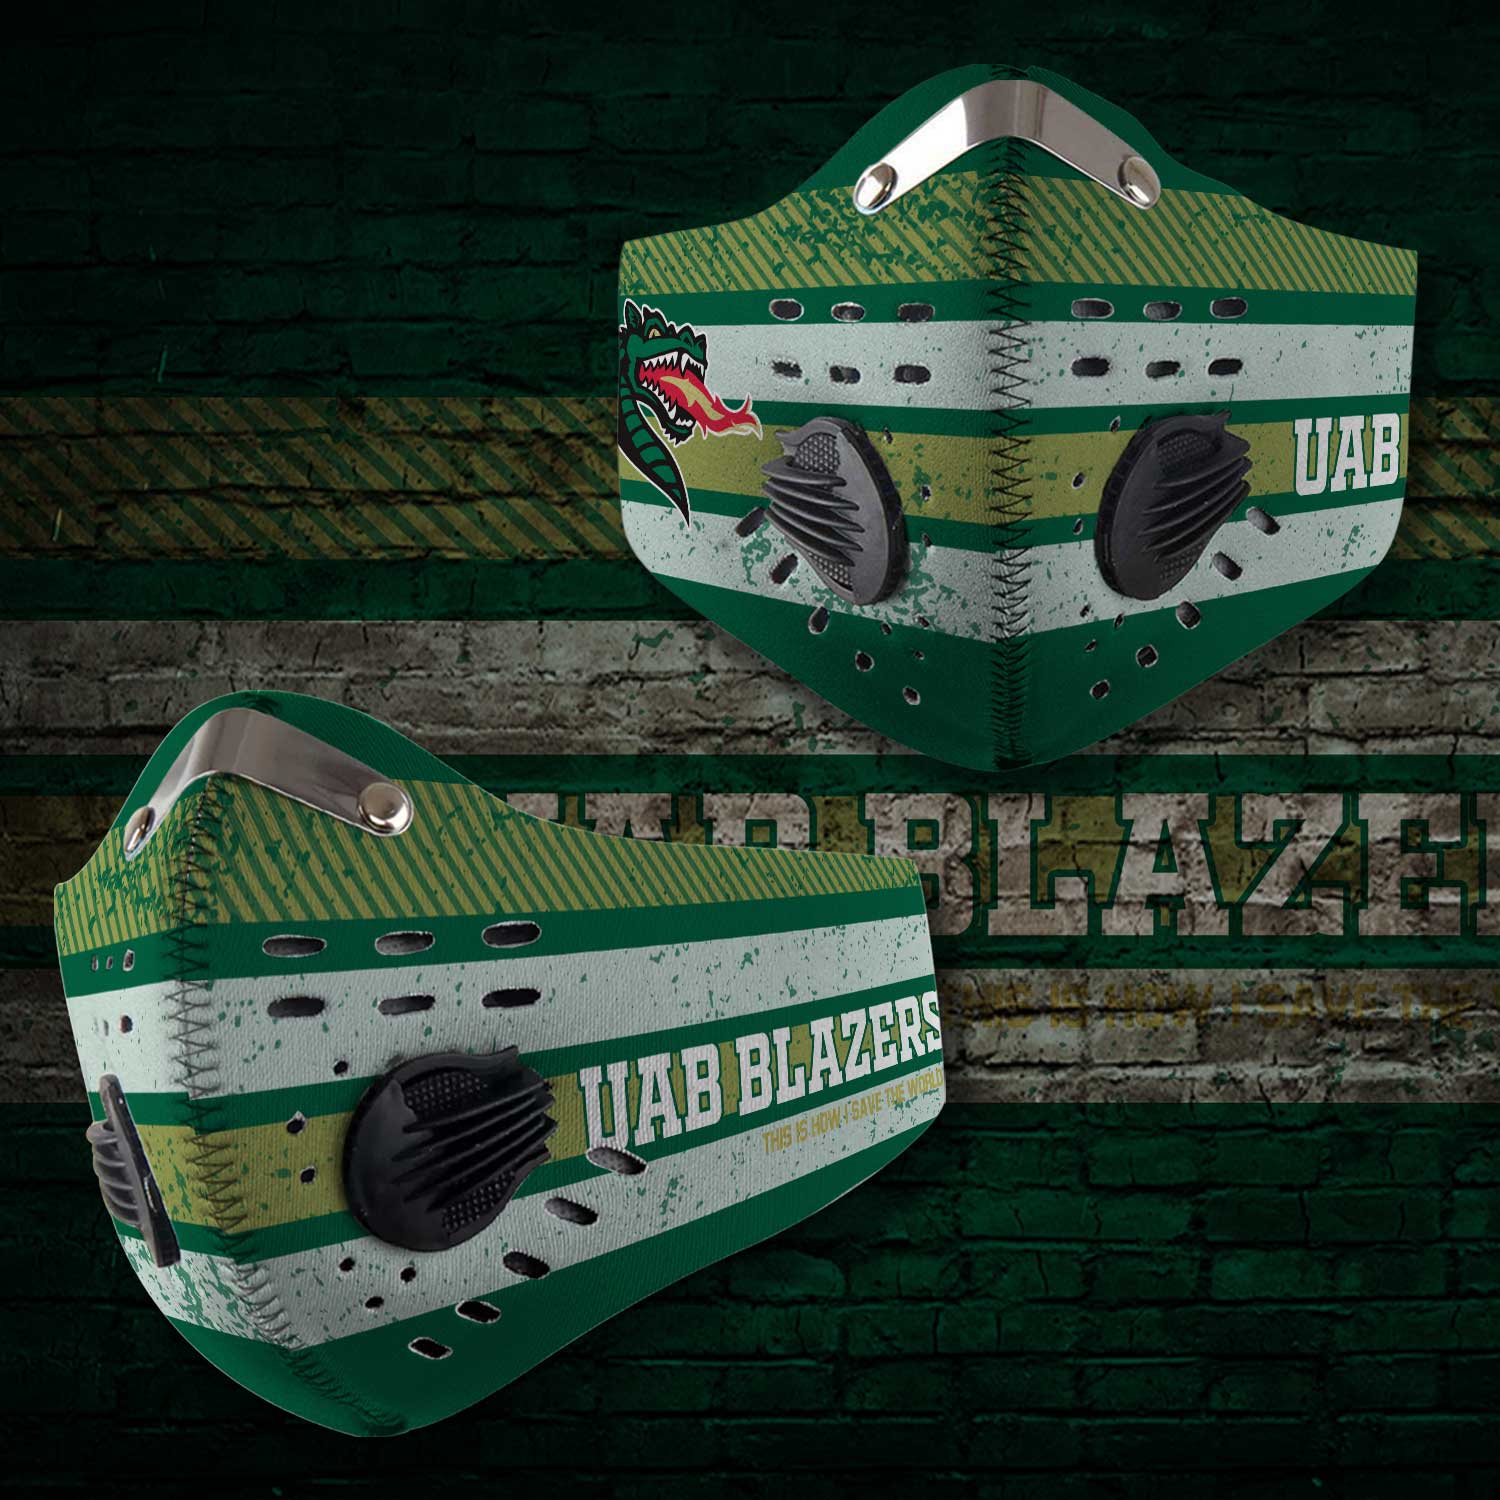 Uab blazers this is how i save the world carbon filter face mask